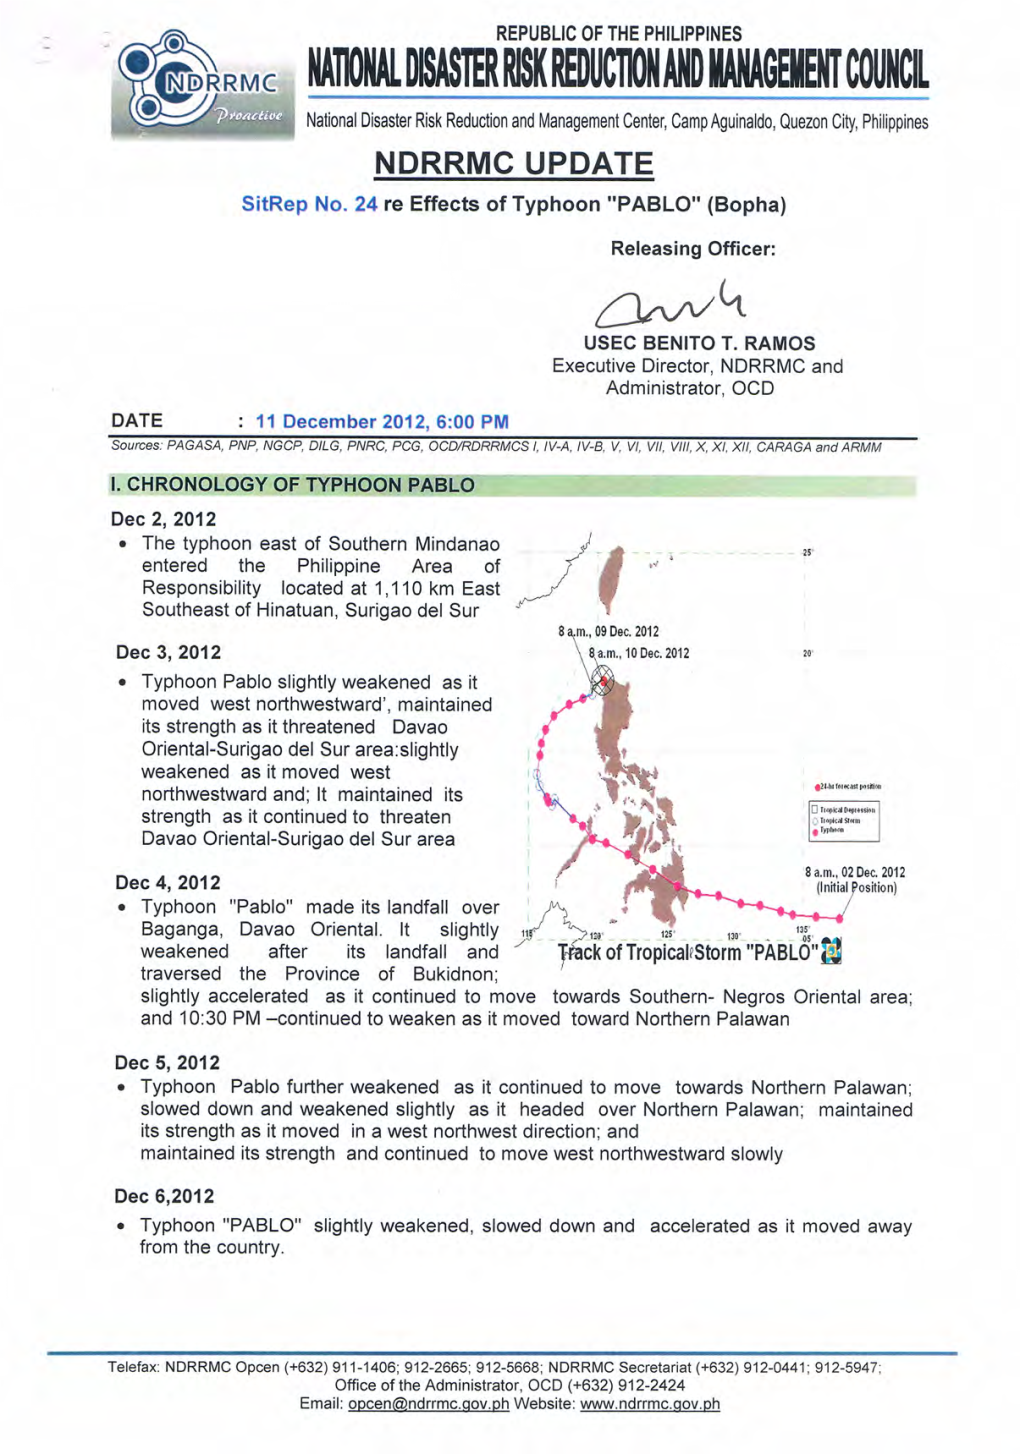 EFFECTS of TYPHOON "PABLO" (BOPHA) AFFECTED POPULATION As of 11 December 2012, 6:00 PM